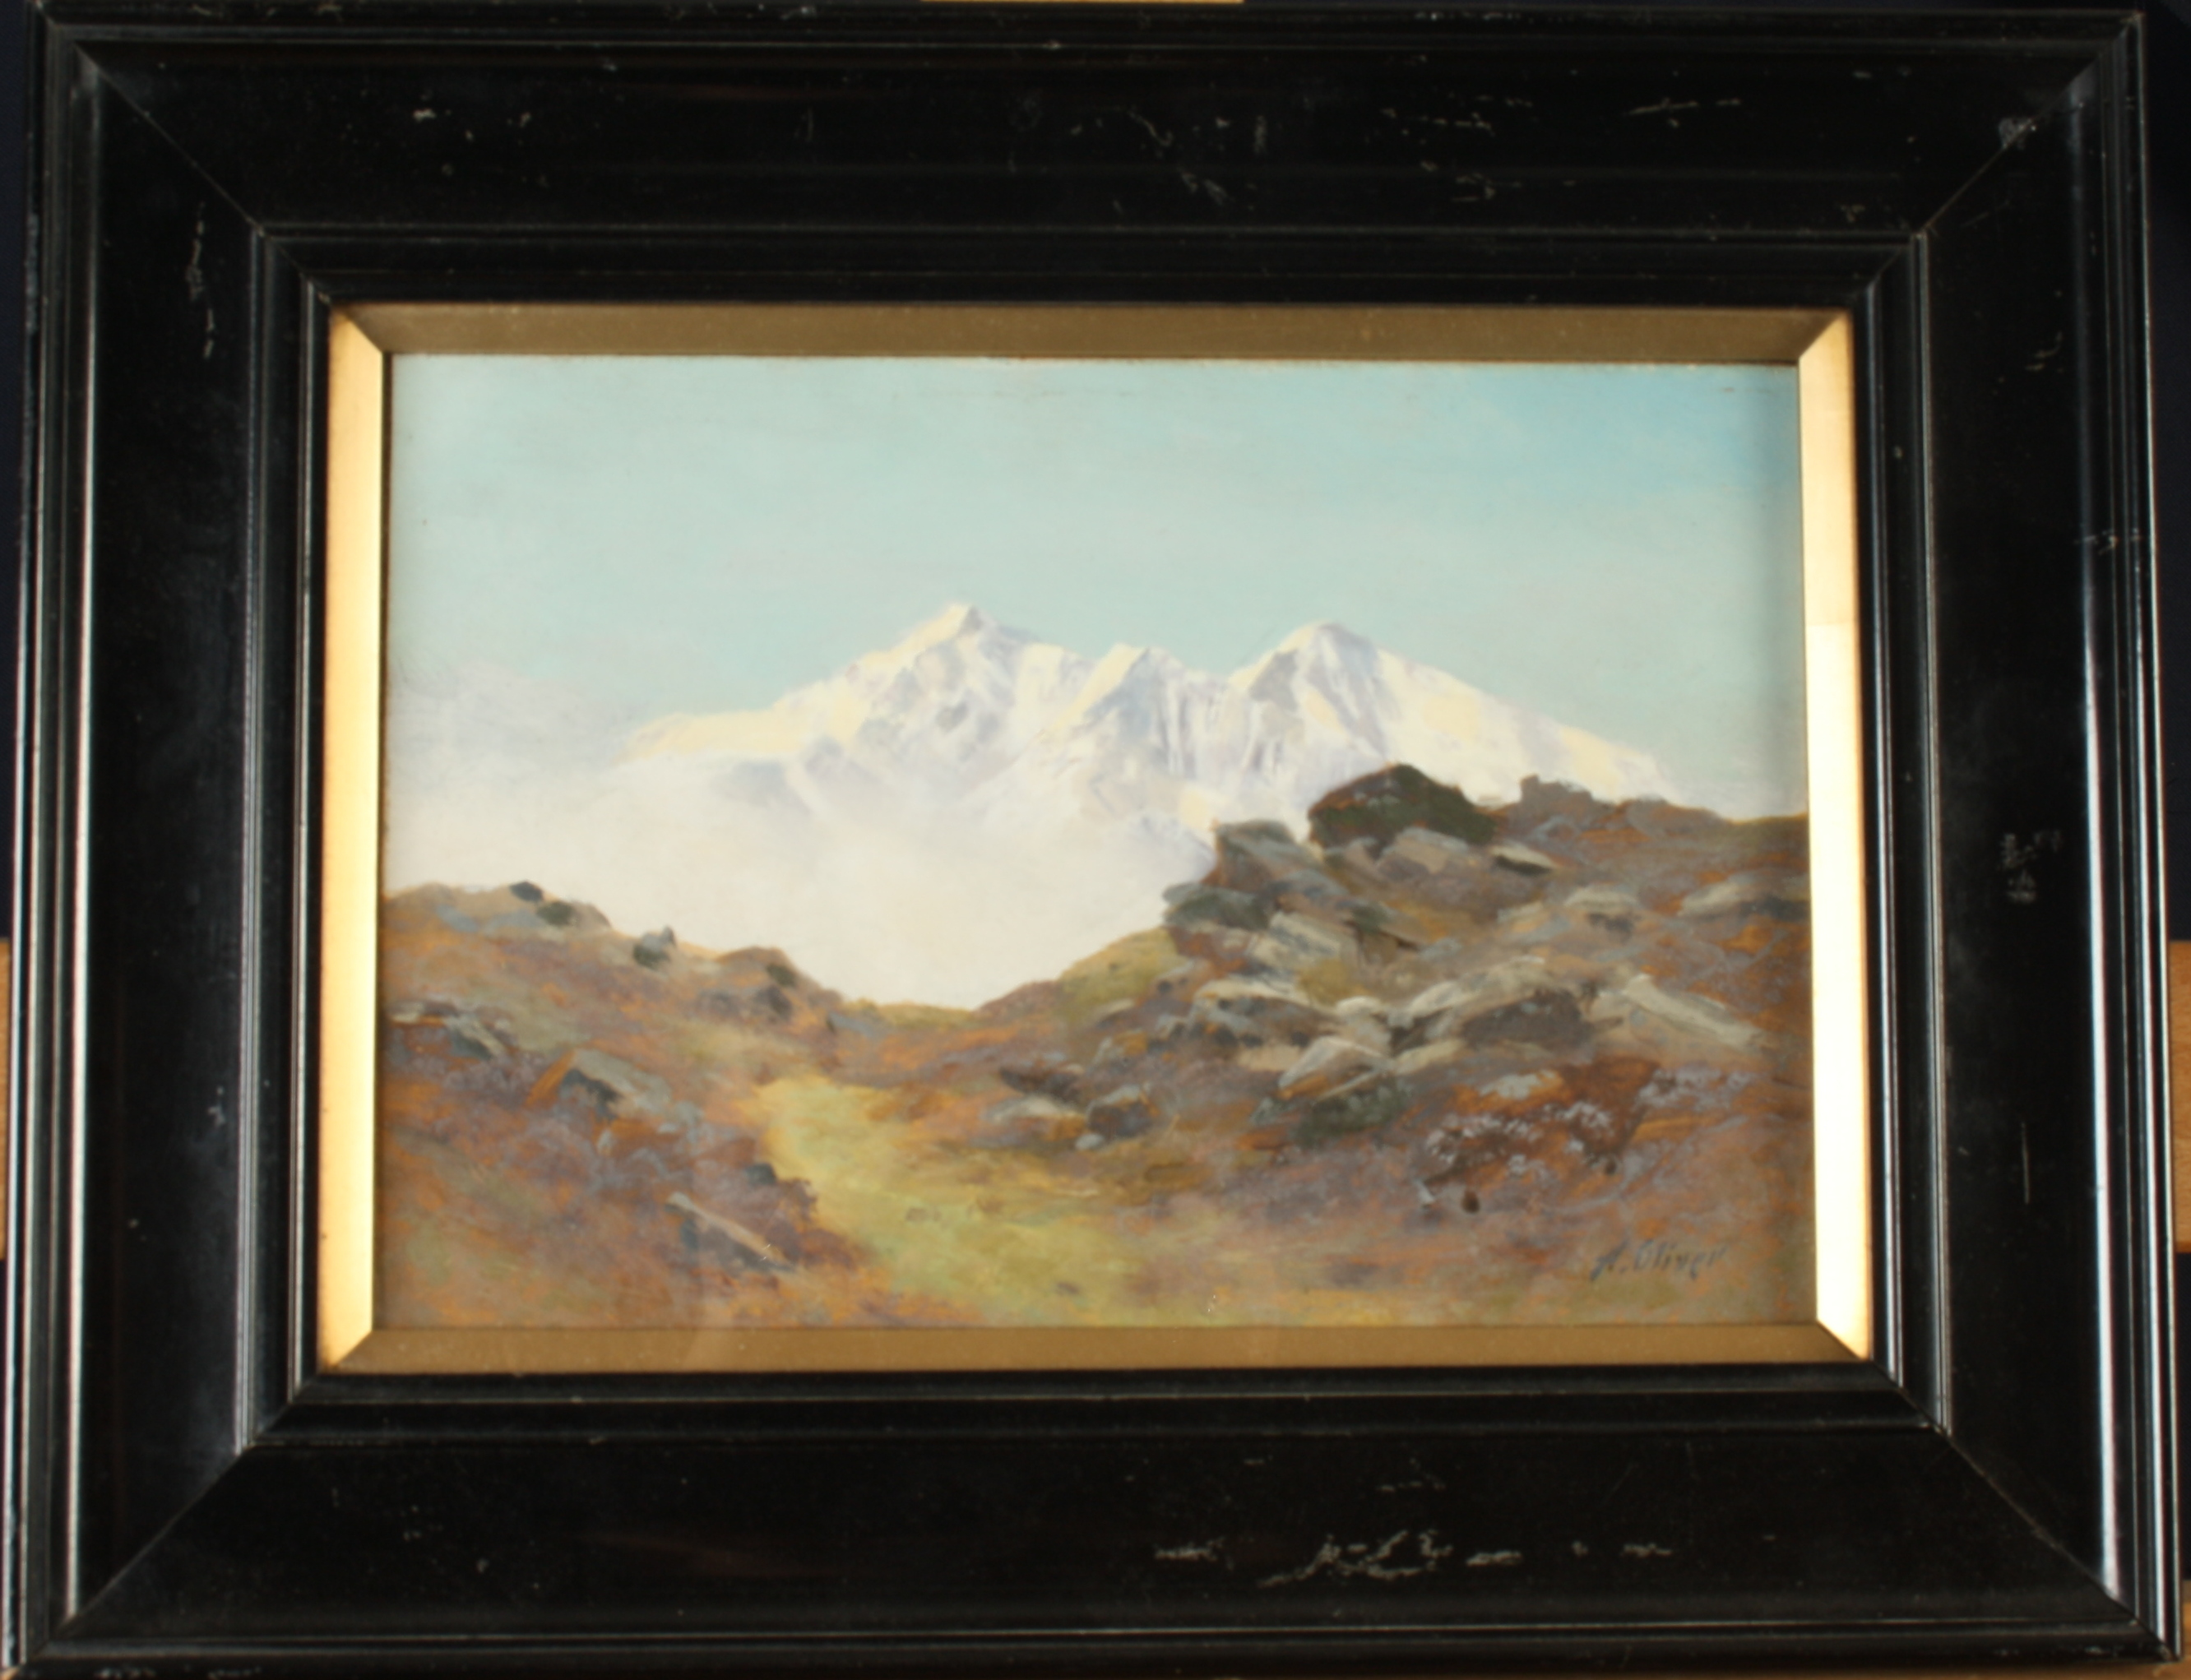 Alfred OLIVER Snowdonia Oil on board Signed 16 x 23cm - Image 2 of 2